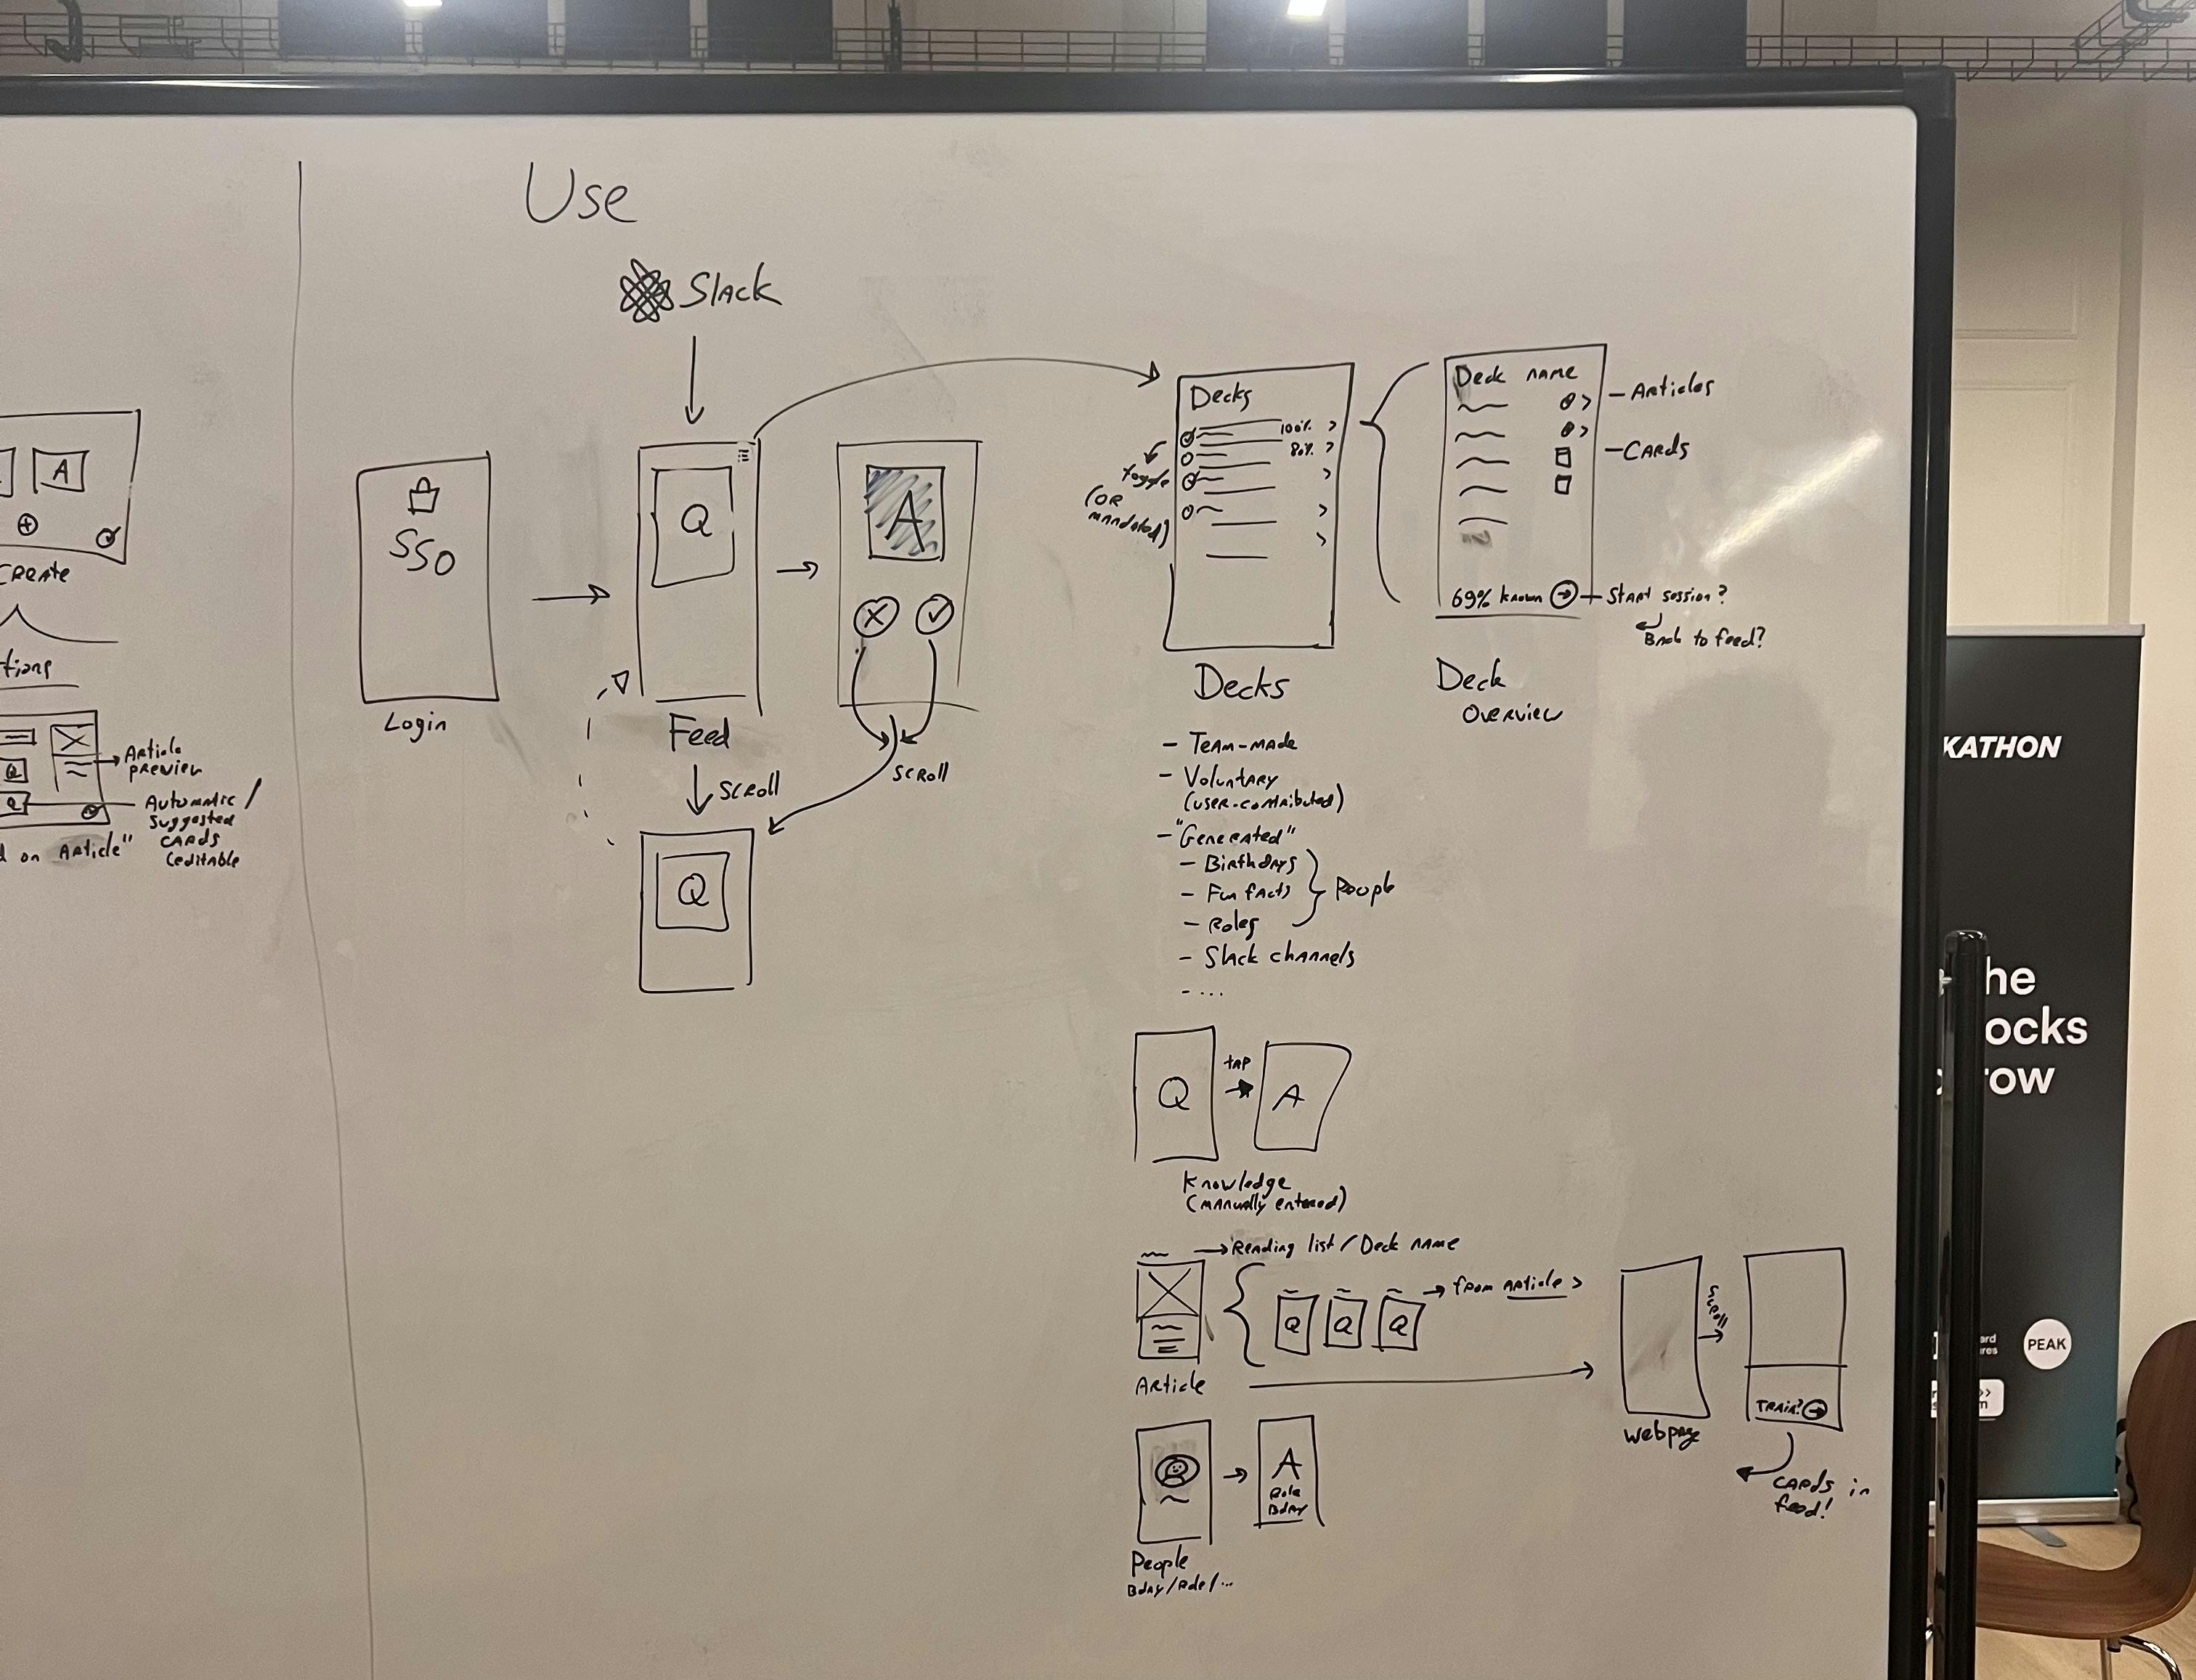 A picture of a whiteboard with a sketched wireframe diagram on it.

The flow starts with a single sign-on screen, which leads into the app’s main use pattern: a card that can be tapped to flip around. Once the card is flipped around, two buttons appear underneath to indicate whether you knew the answer or not.

A button in the top right leads to a Library screen that contains all card decks. Tapping on a deck leads to a separate page that contains all the cards in the deck.